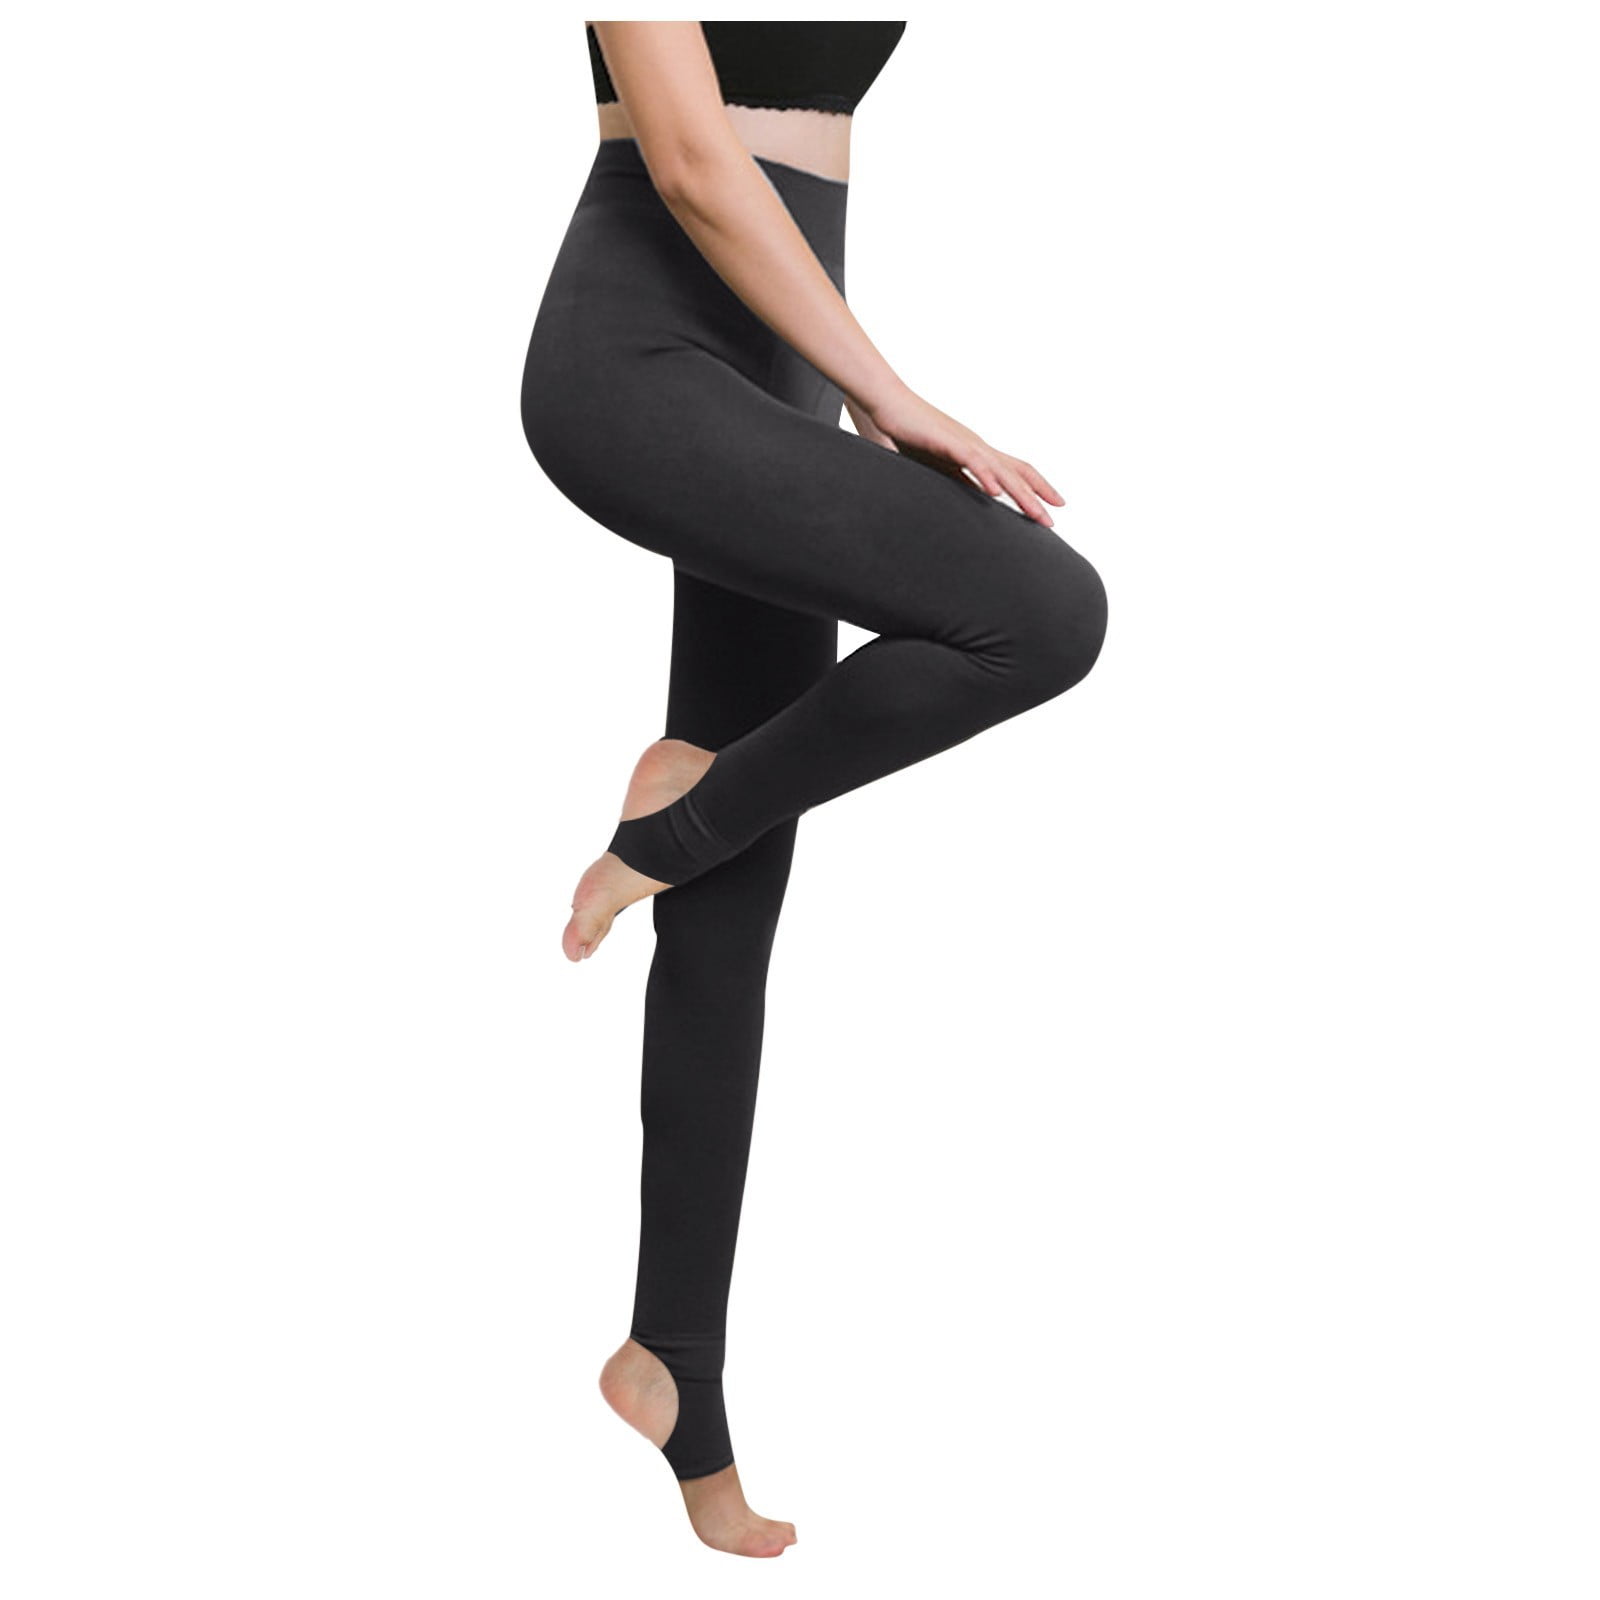 Knosfe Womens Compression Leggings Fleece Lined Tummy Control Ladies ...